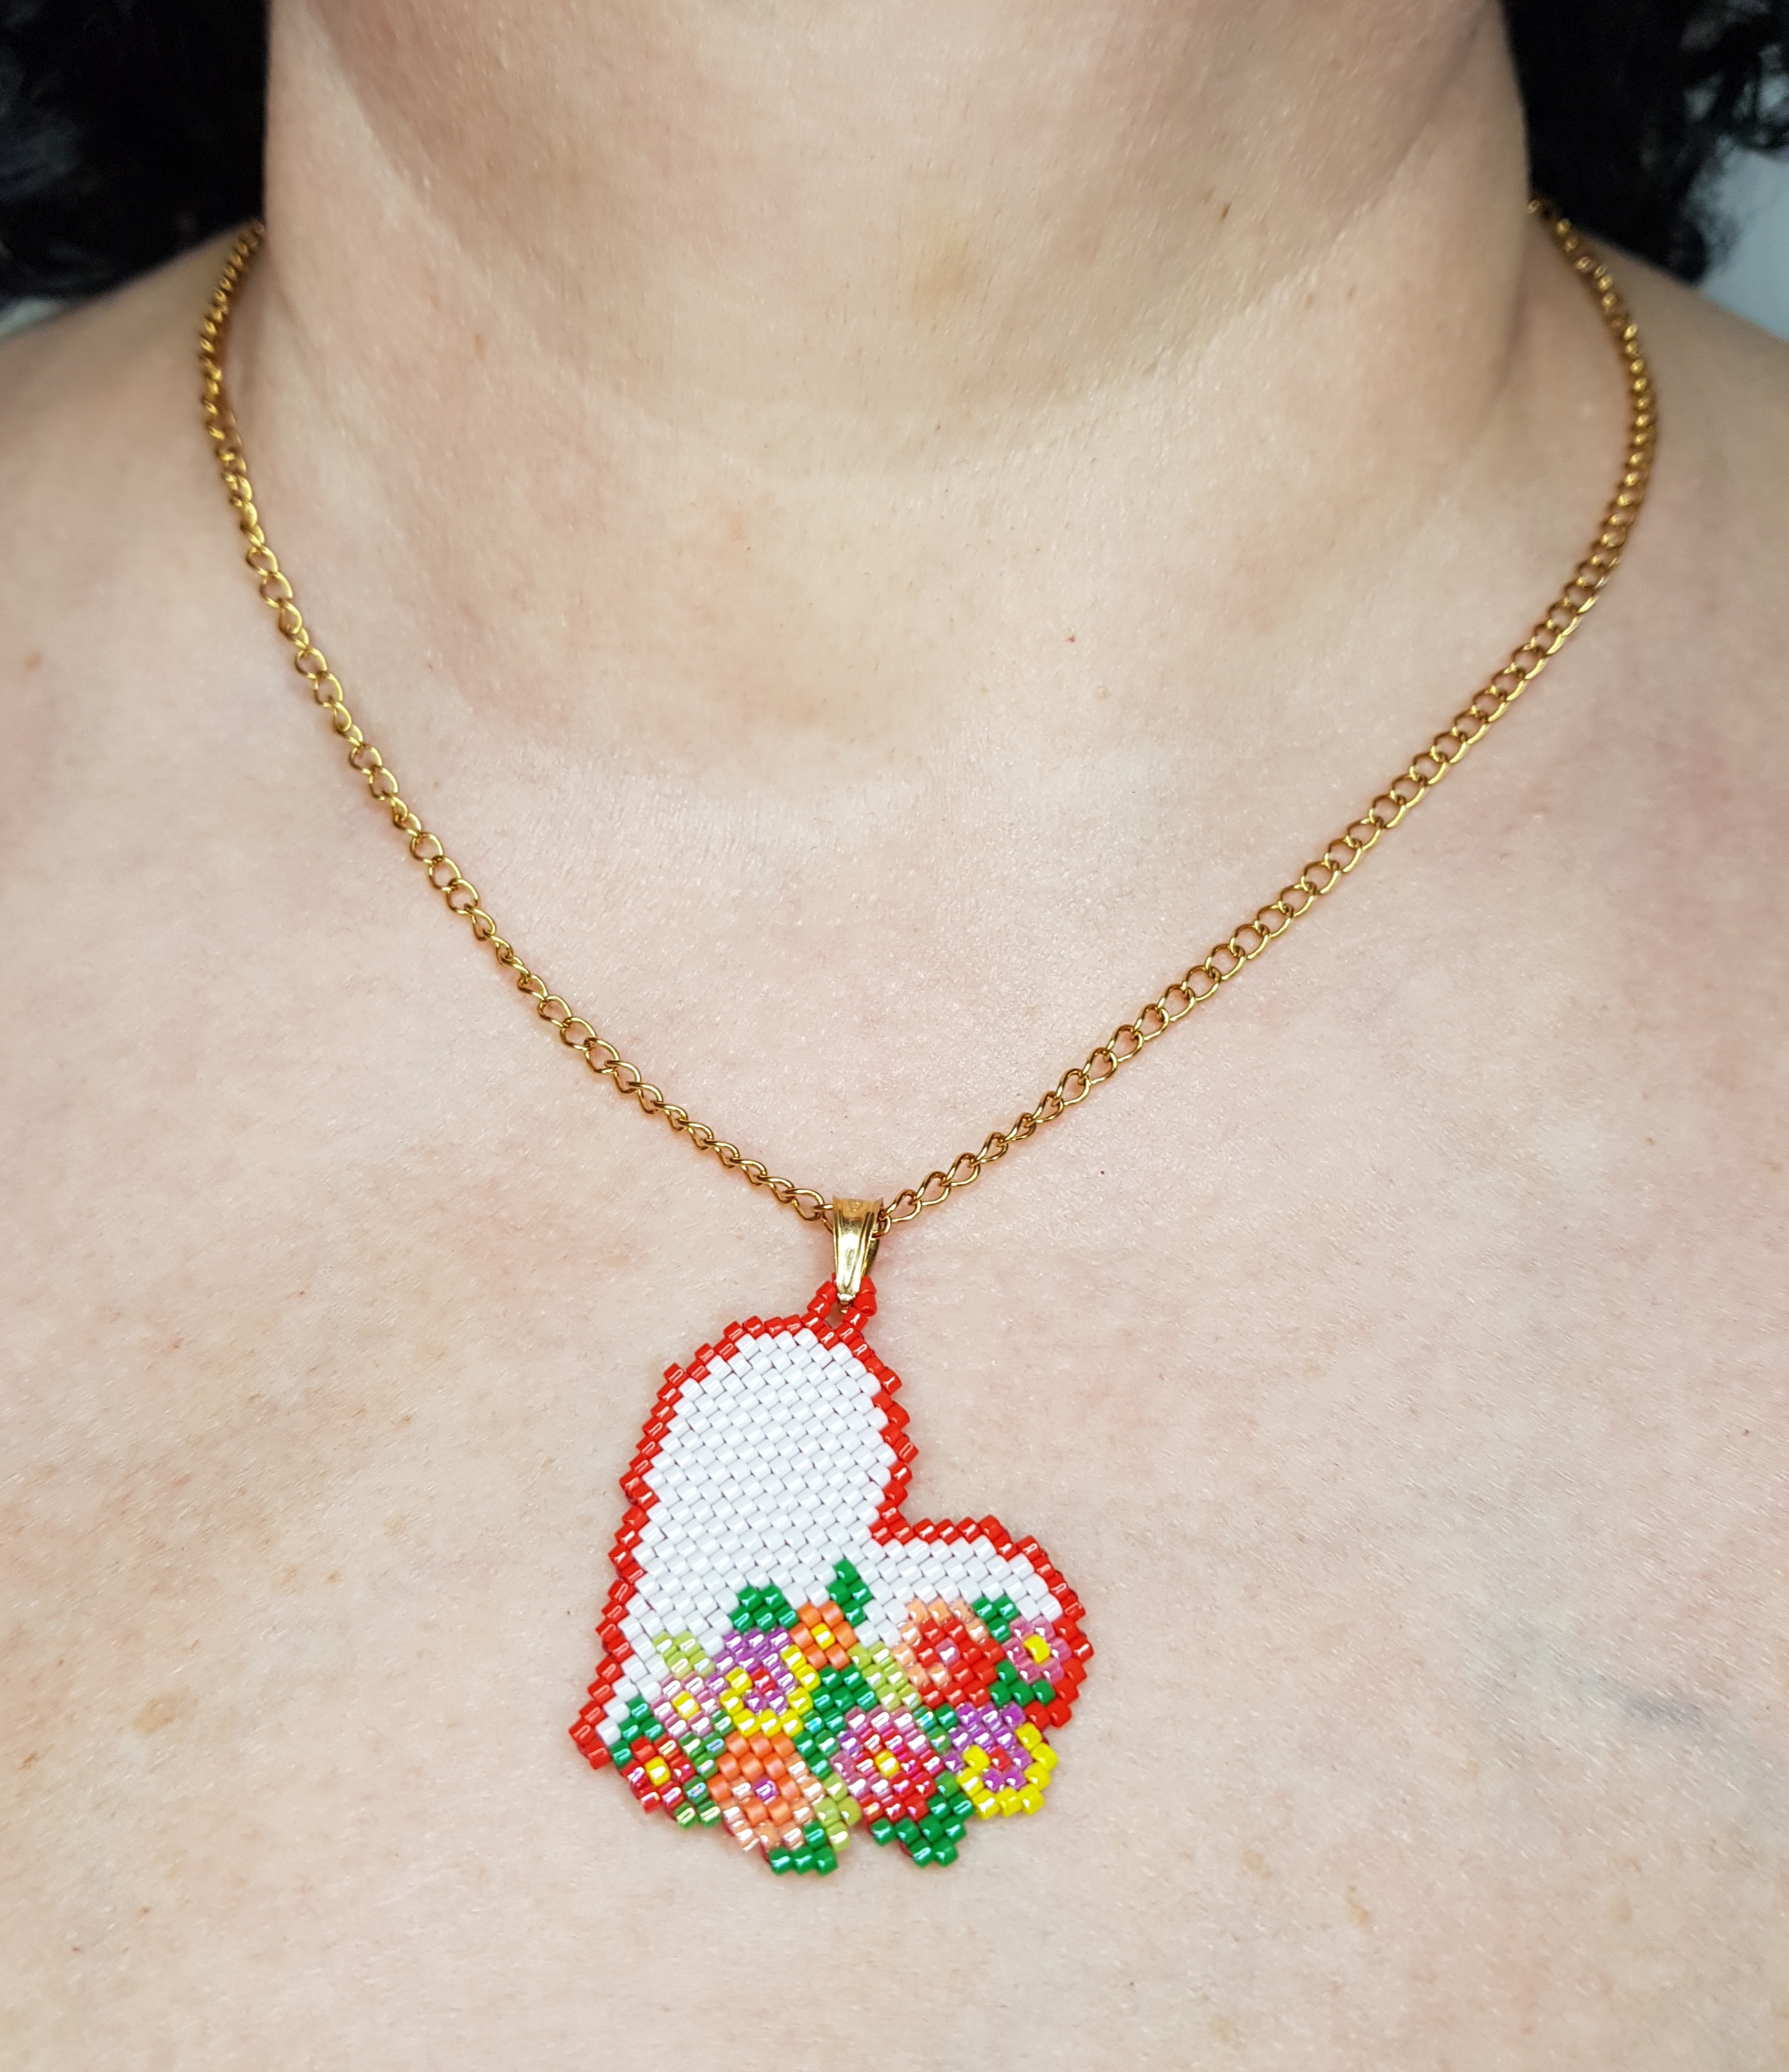 Flower - Heart necklace with beaded flowers